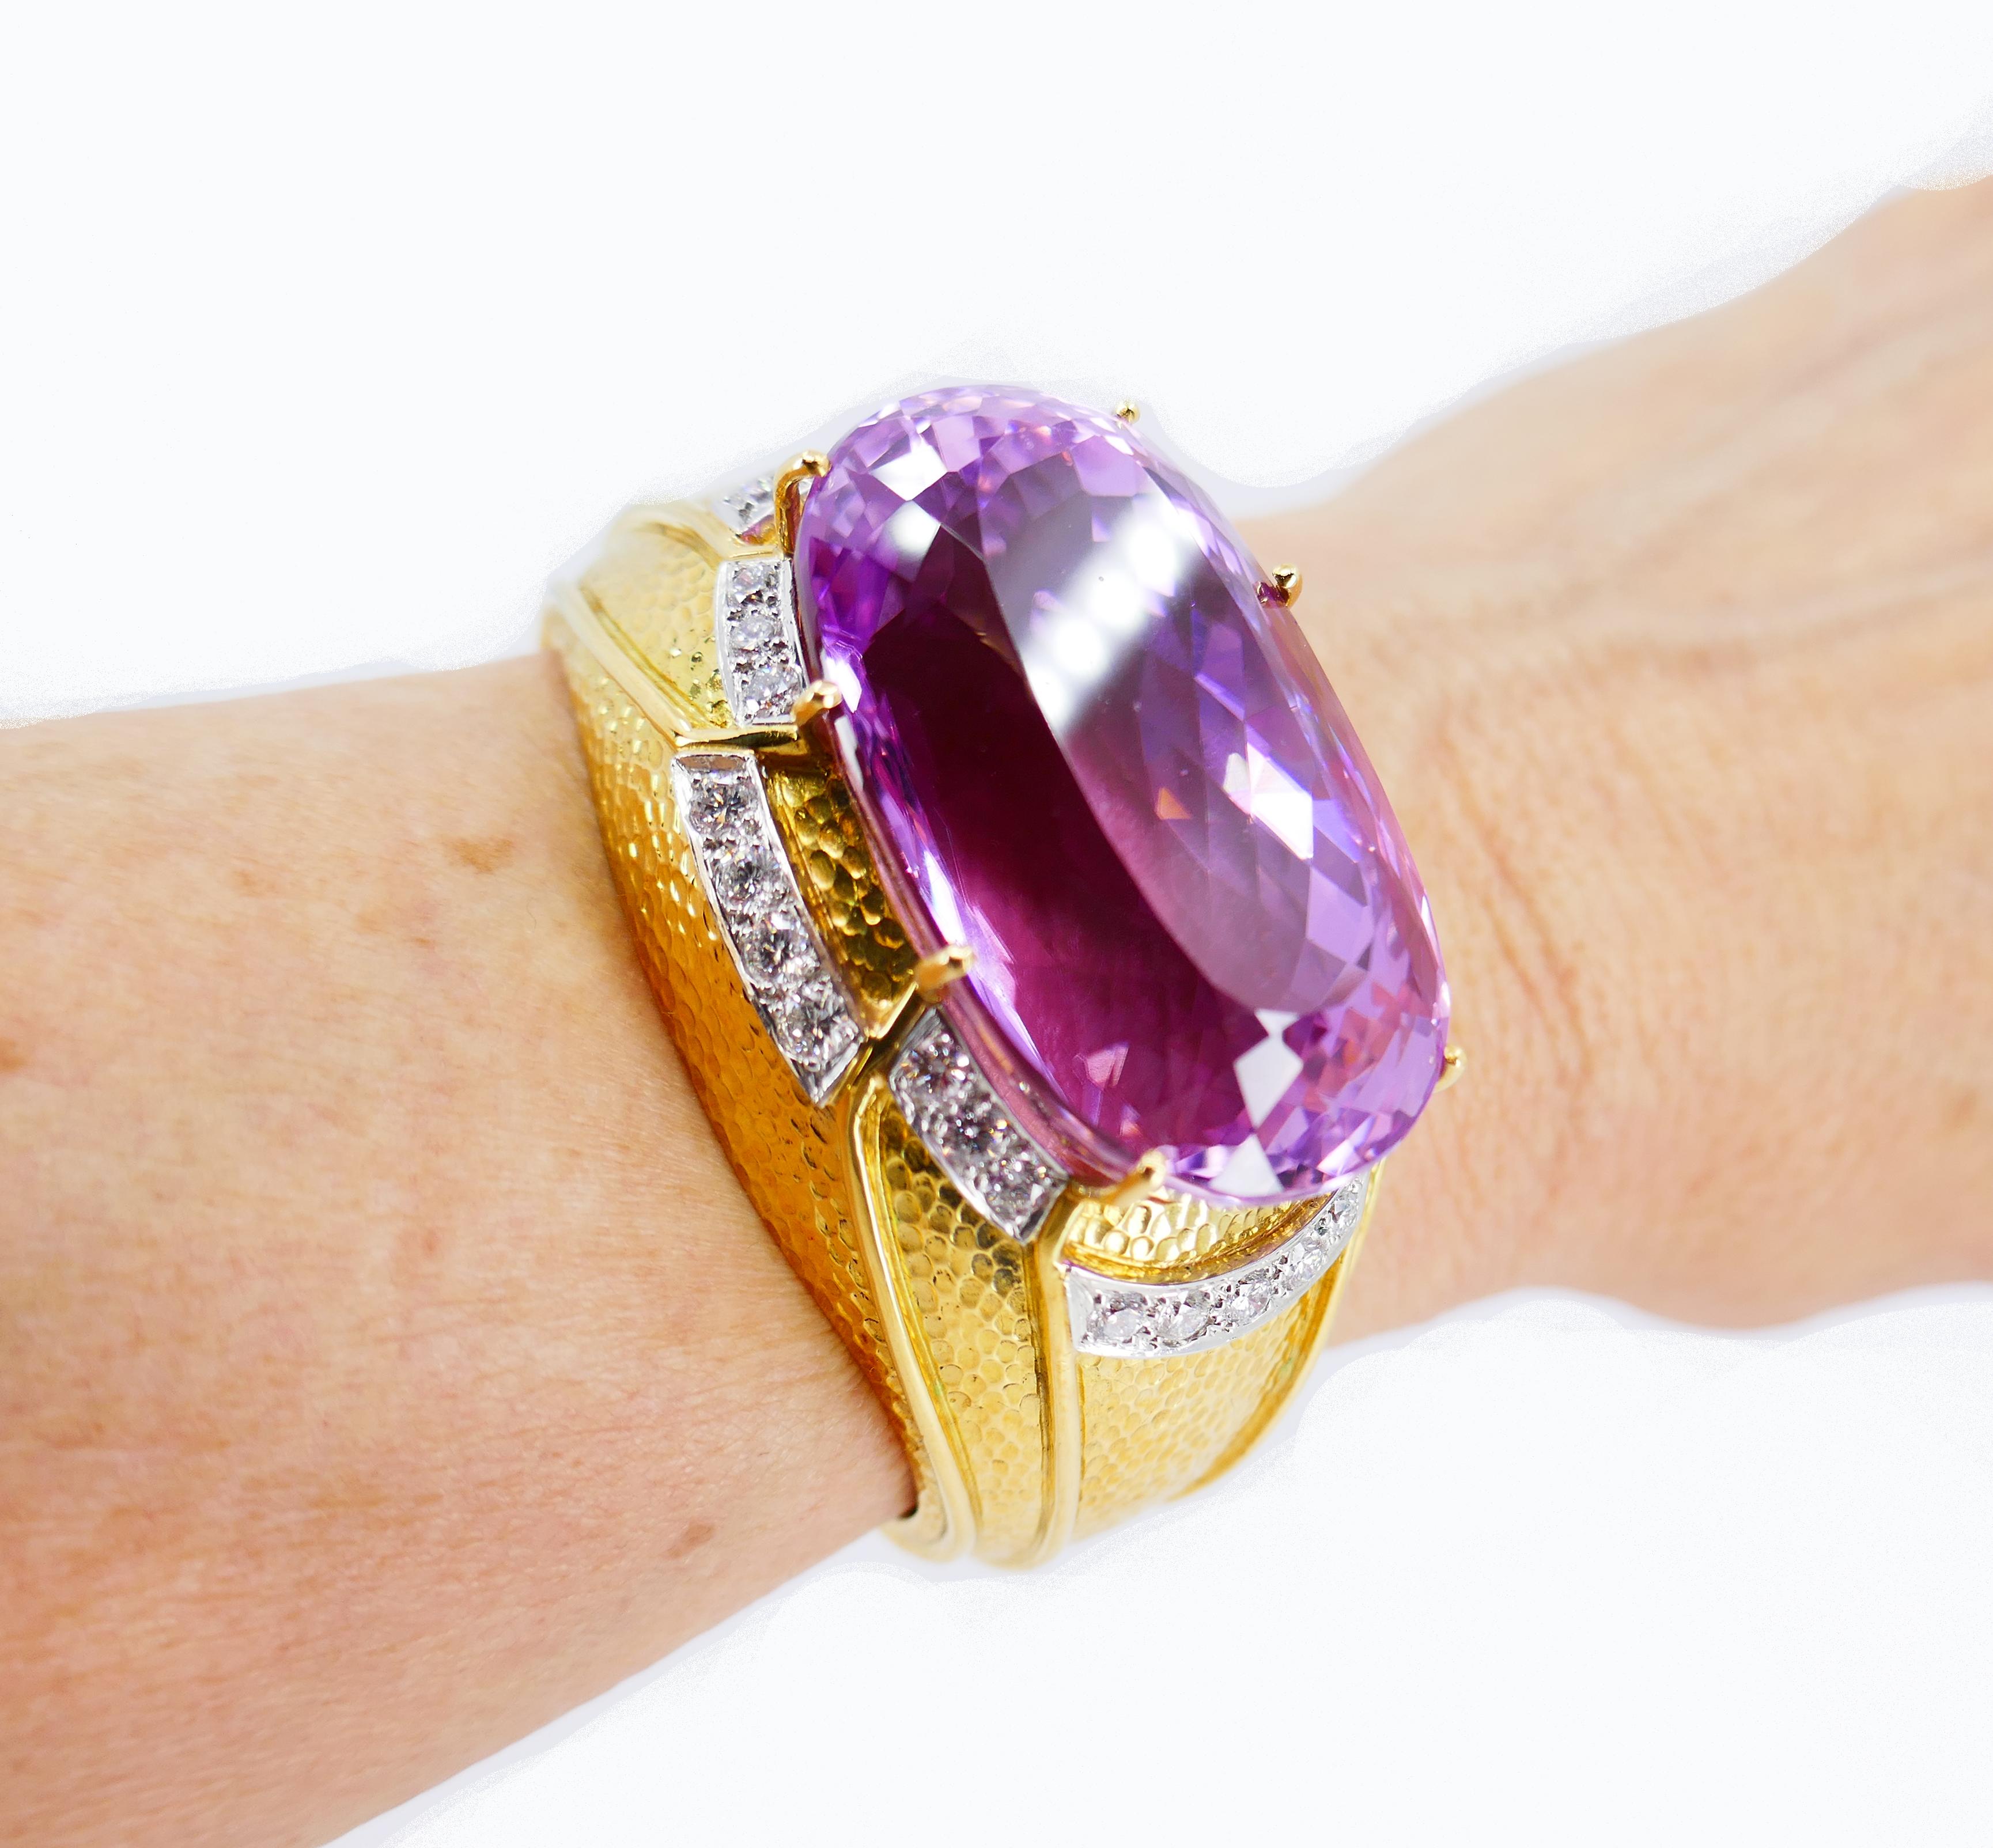 A stunning gold bracelet featuring kunzite and diamond, made by David Webb.
This impressive kunzite bracelet is made of beautifully hammered 18k yellow gold. The kunzite is staged in the center and framed with diamonds set in platinum. Four gold